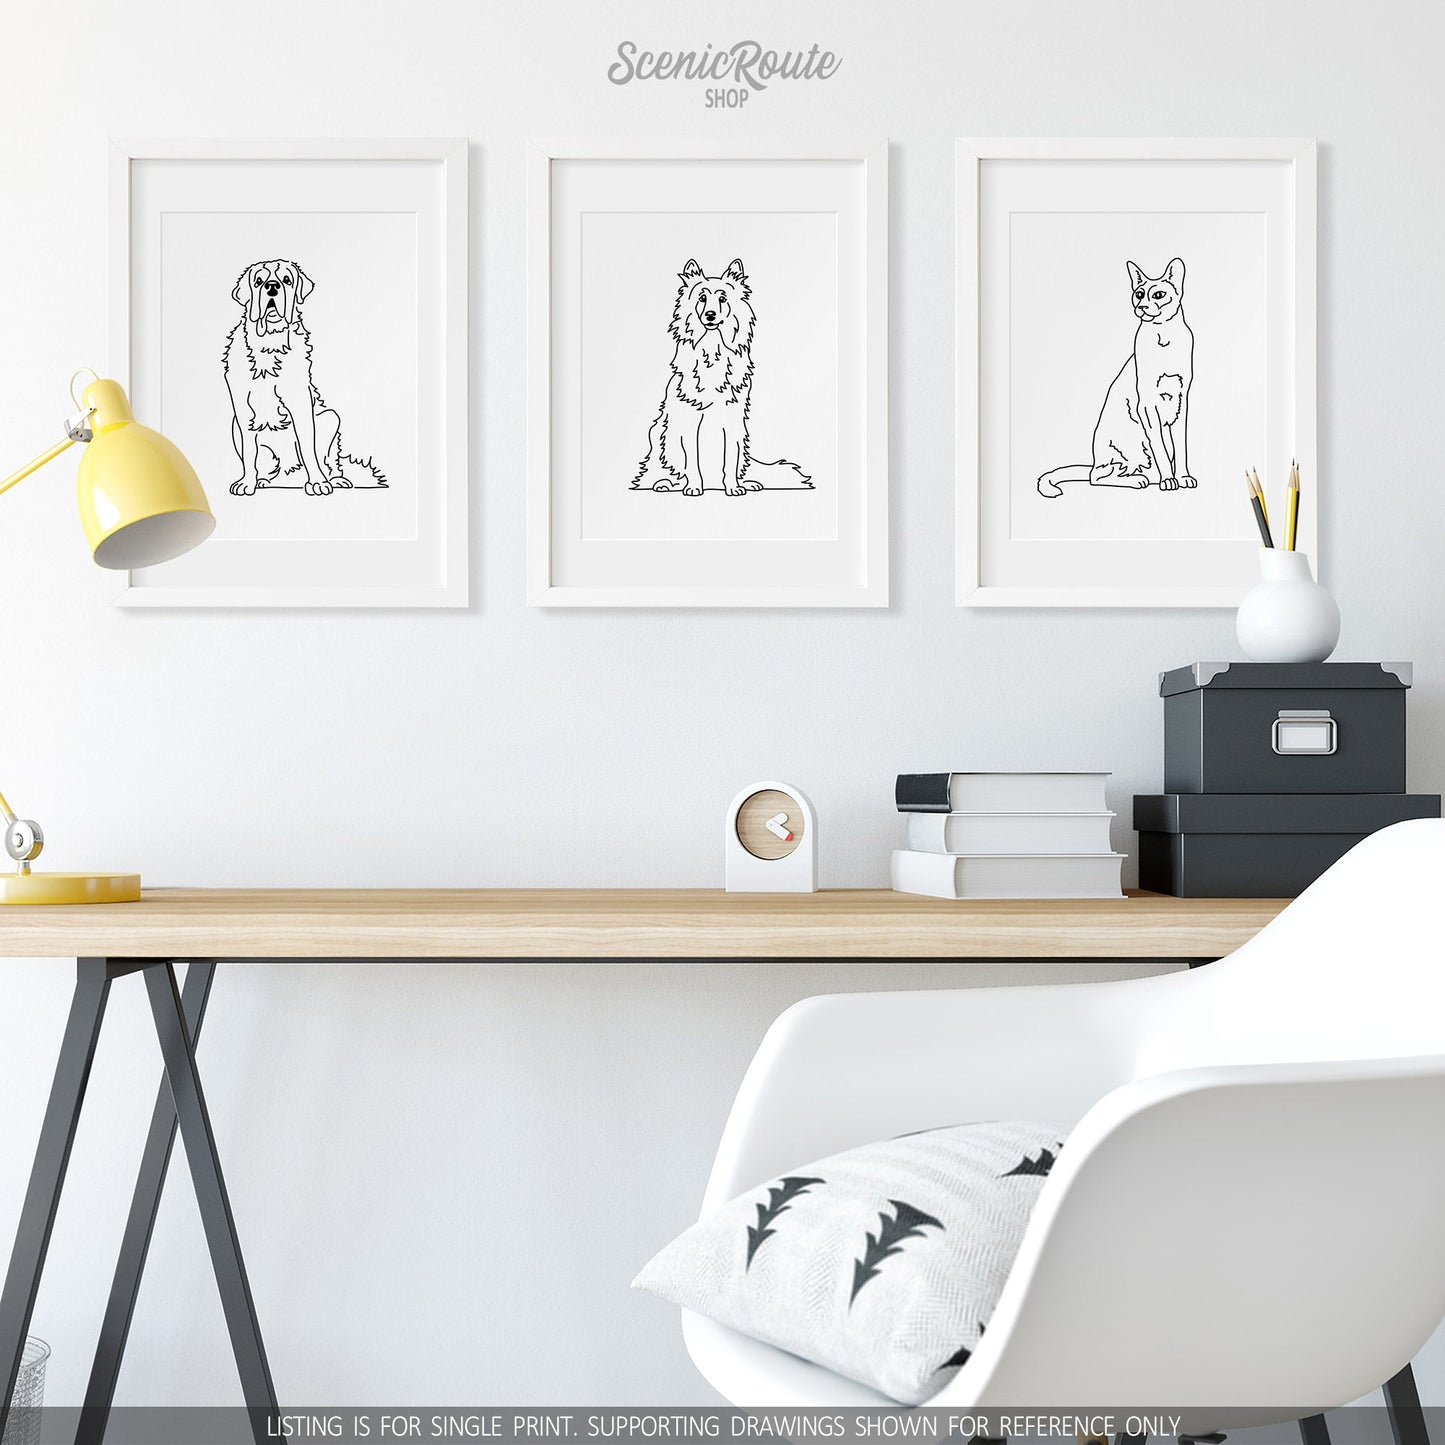 A group of three framed drawings on a white wall above a desk. The line art drawings include a Saint Bernard dog, a Shetland Sheepdog, and a Siamese cat